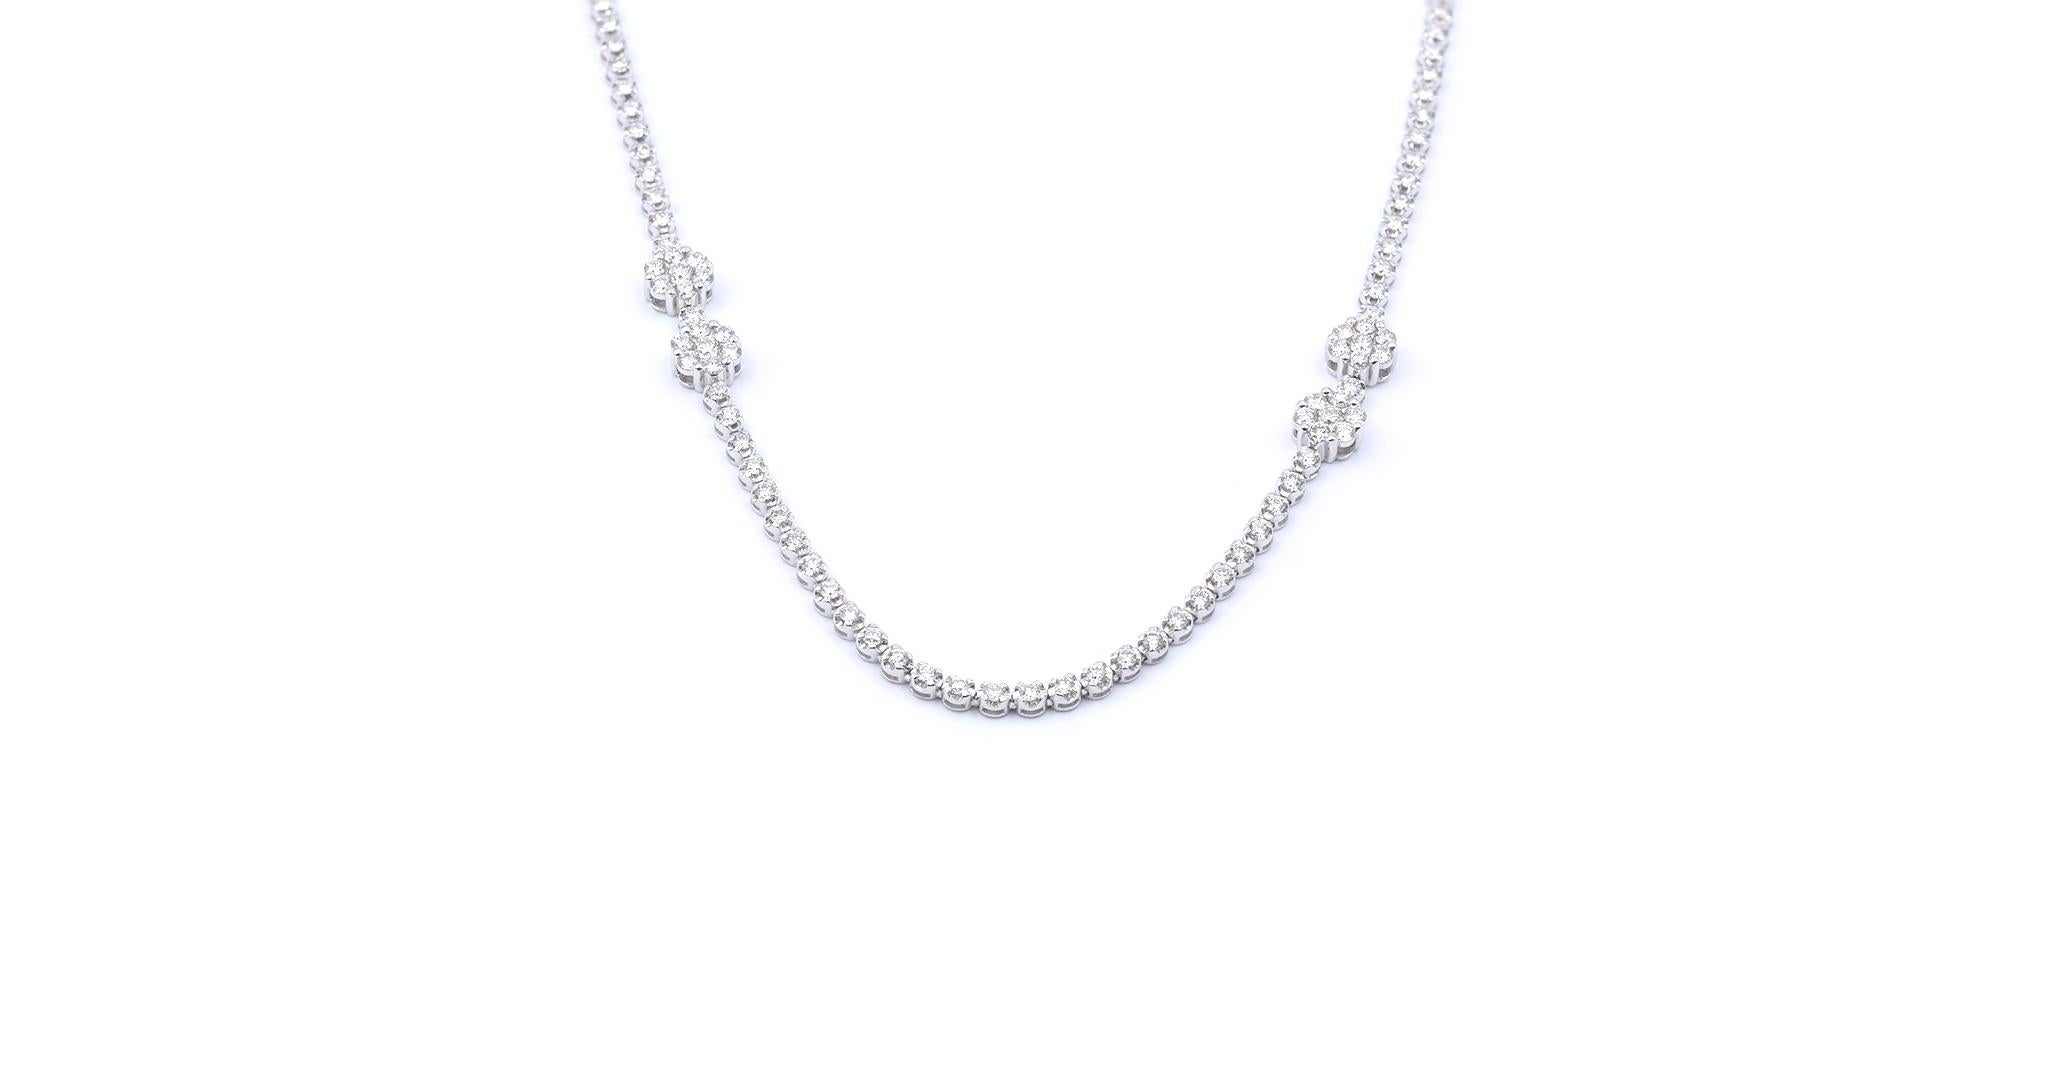 Designer: Custom
Material: 14k white gold 
Diamond: 300 round brilliant cuts = 12.6cttw
Color: H-I
Clarity: SI
Dimensions: necklace measures 32-inches in length and it is approximately 7.20mm wide
Weight: 28.91 grams
